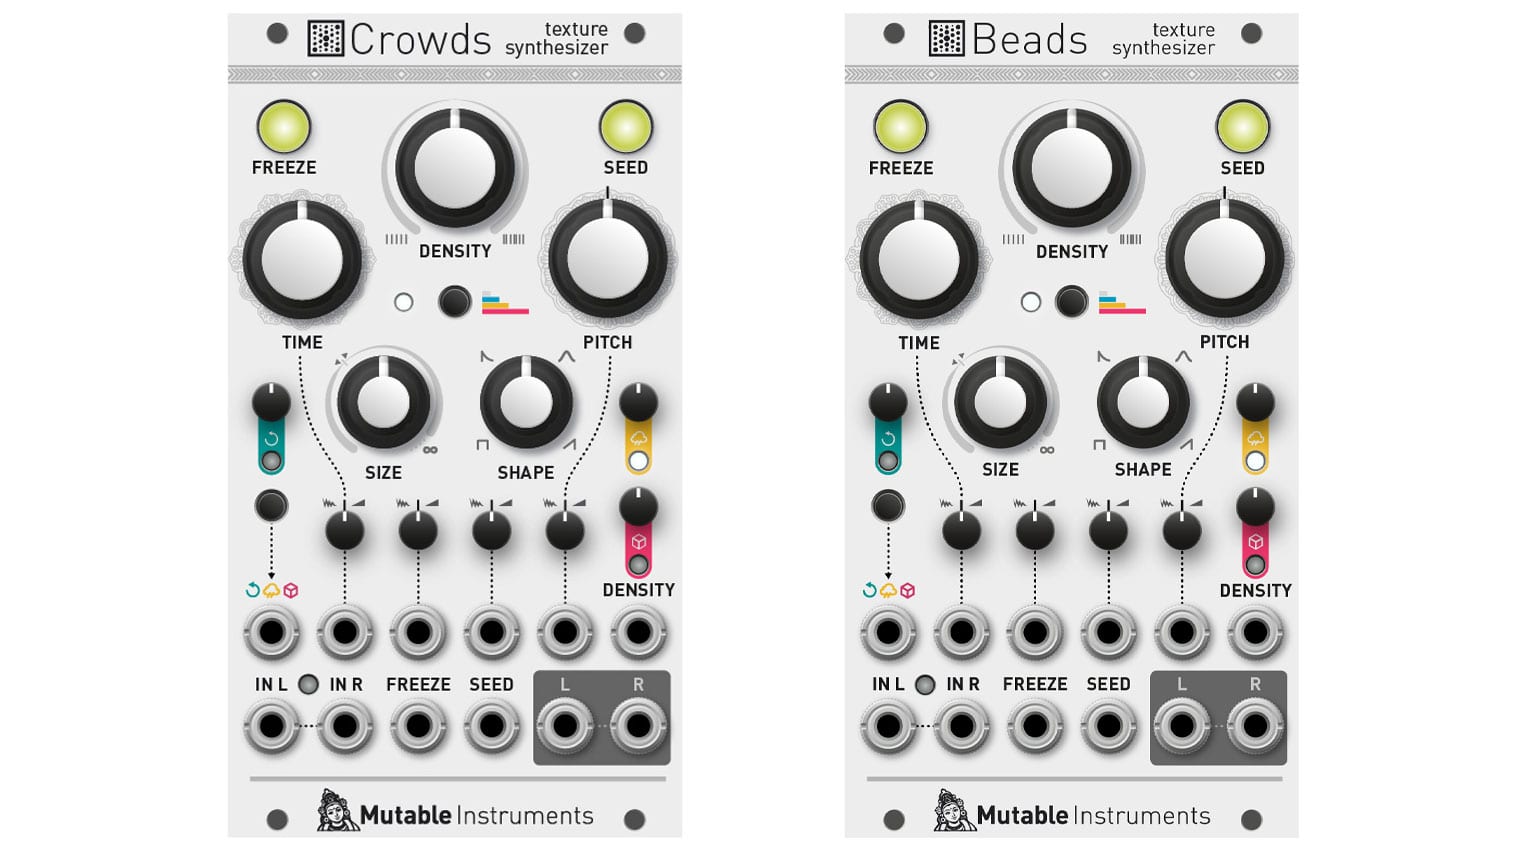 Beads, an illustrated history from Mutable Instruments - gearnews.com